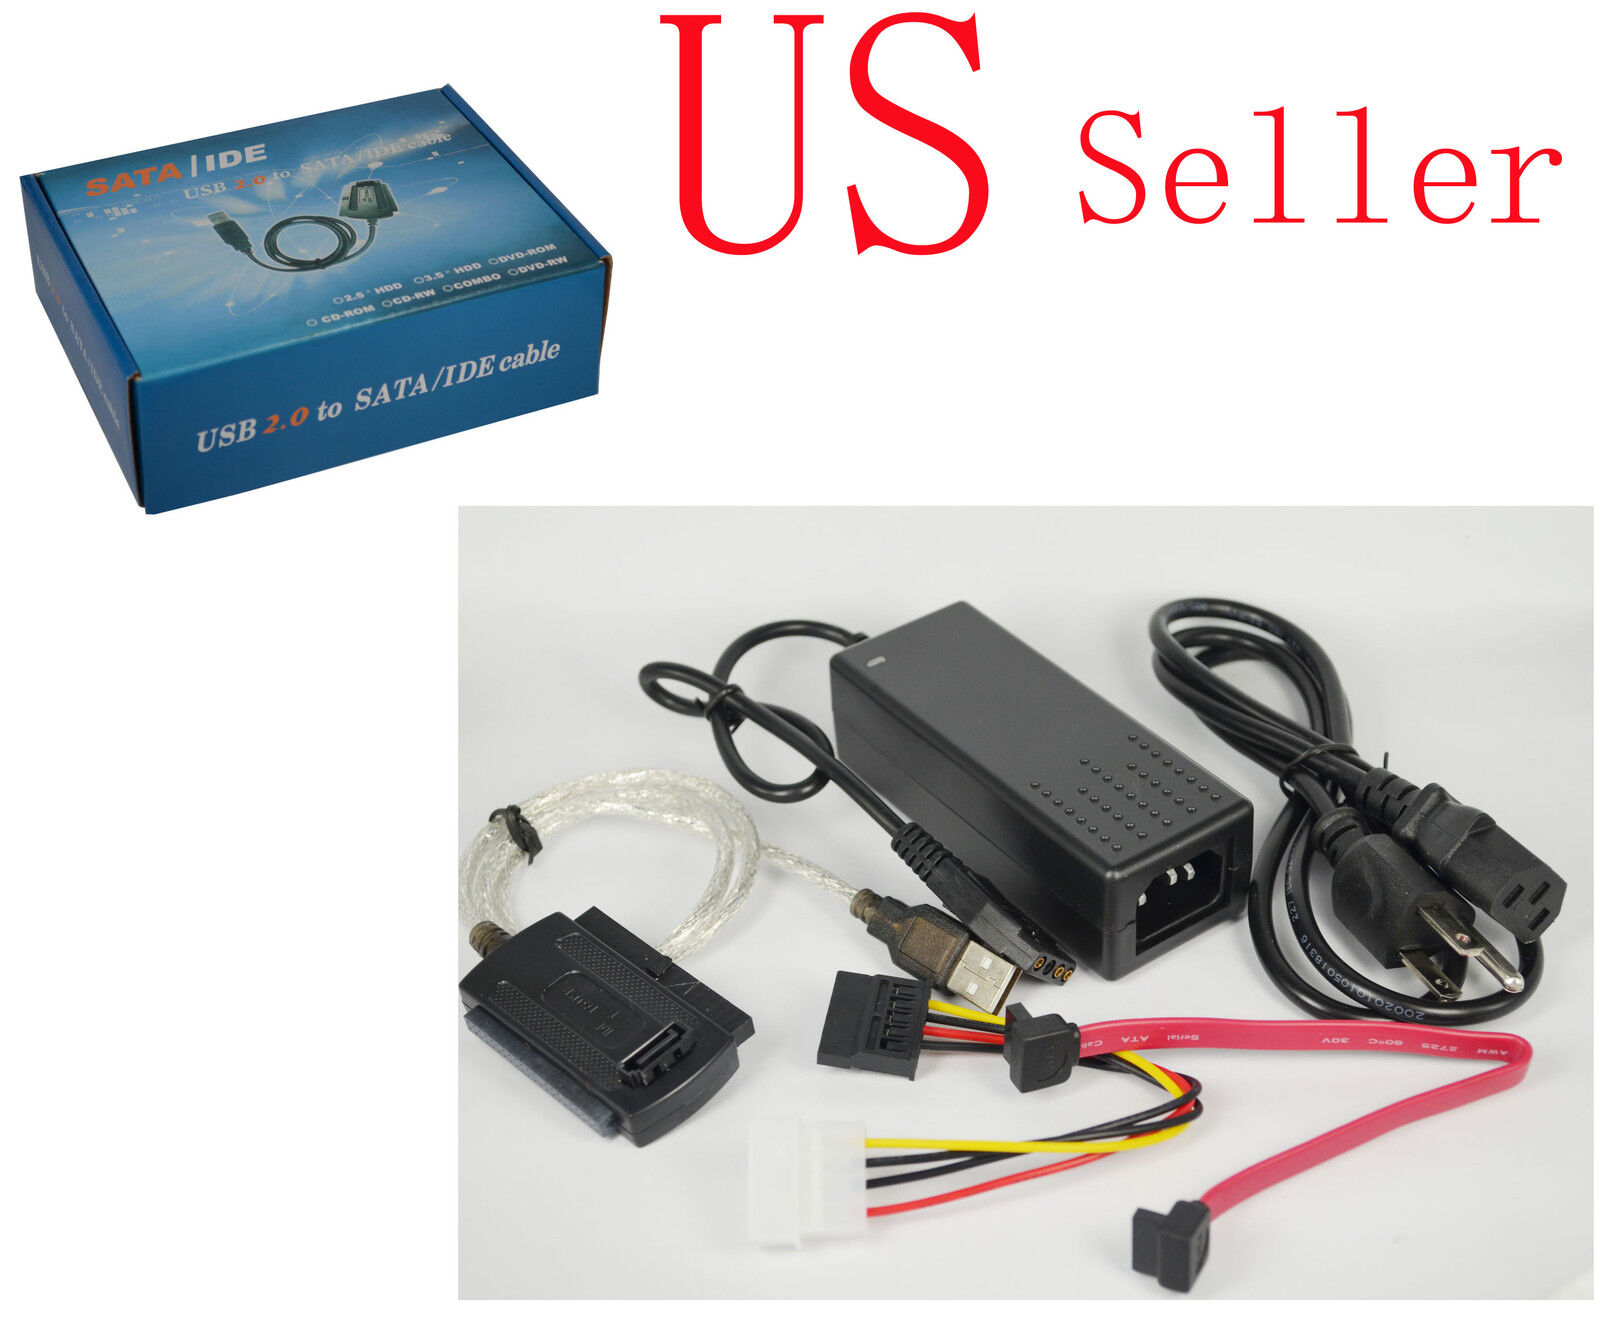 Great Choice Products New 5 In One Box Usb 2.0 To Ide Sata S-Ata 2.5 3.5 Hd Hdd Adapter Cable